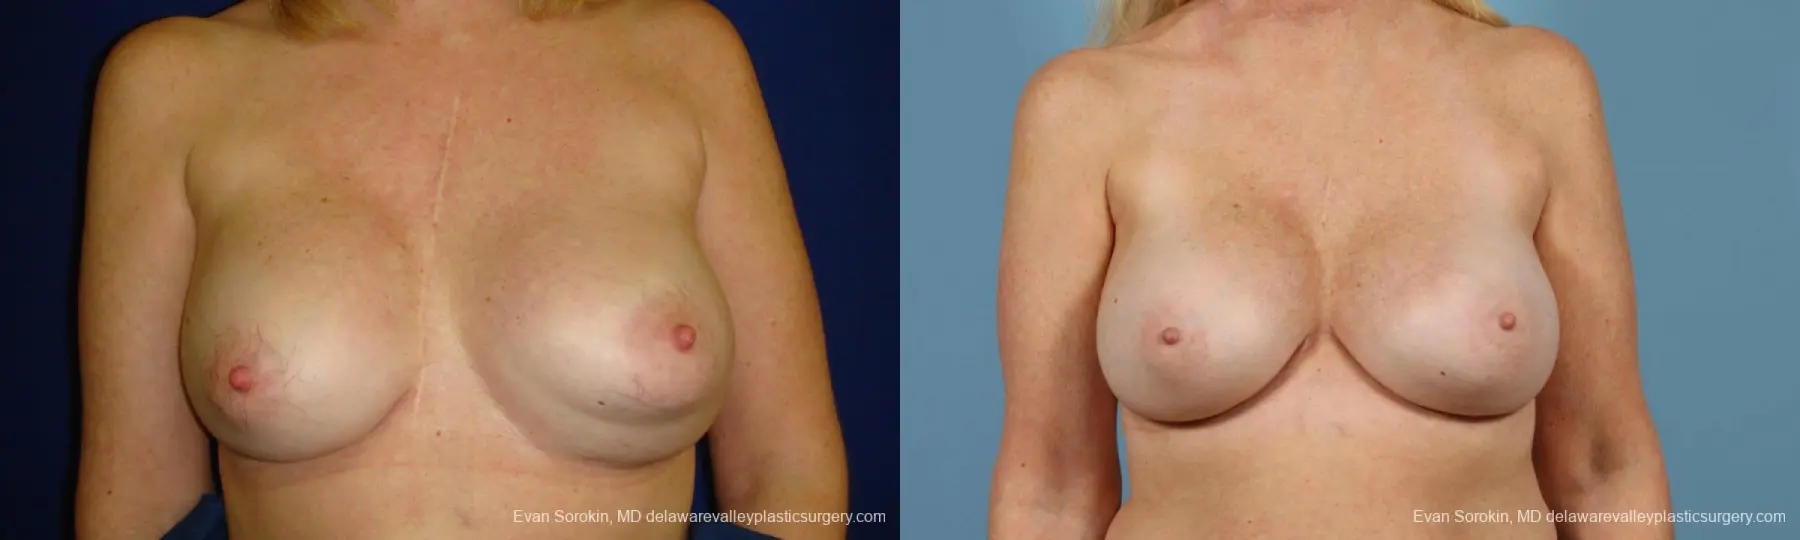 Philadelphia Breast Augmentation 9457 - Before and After